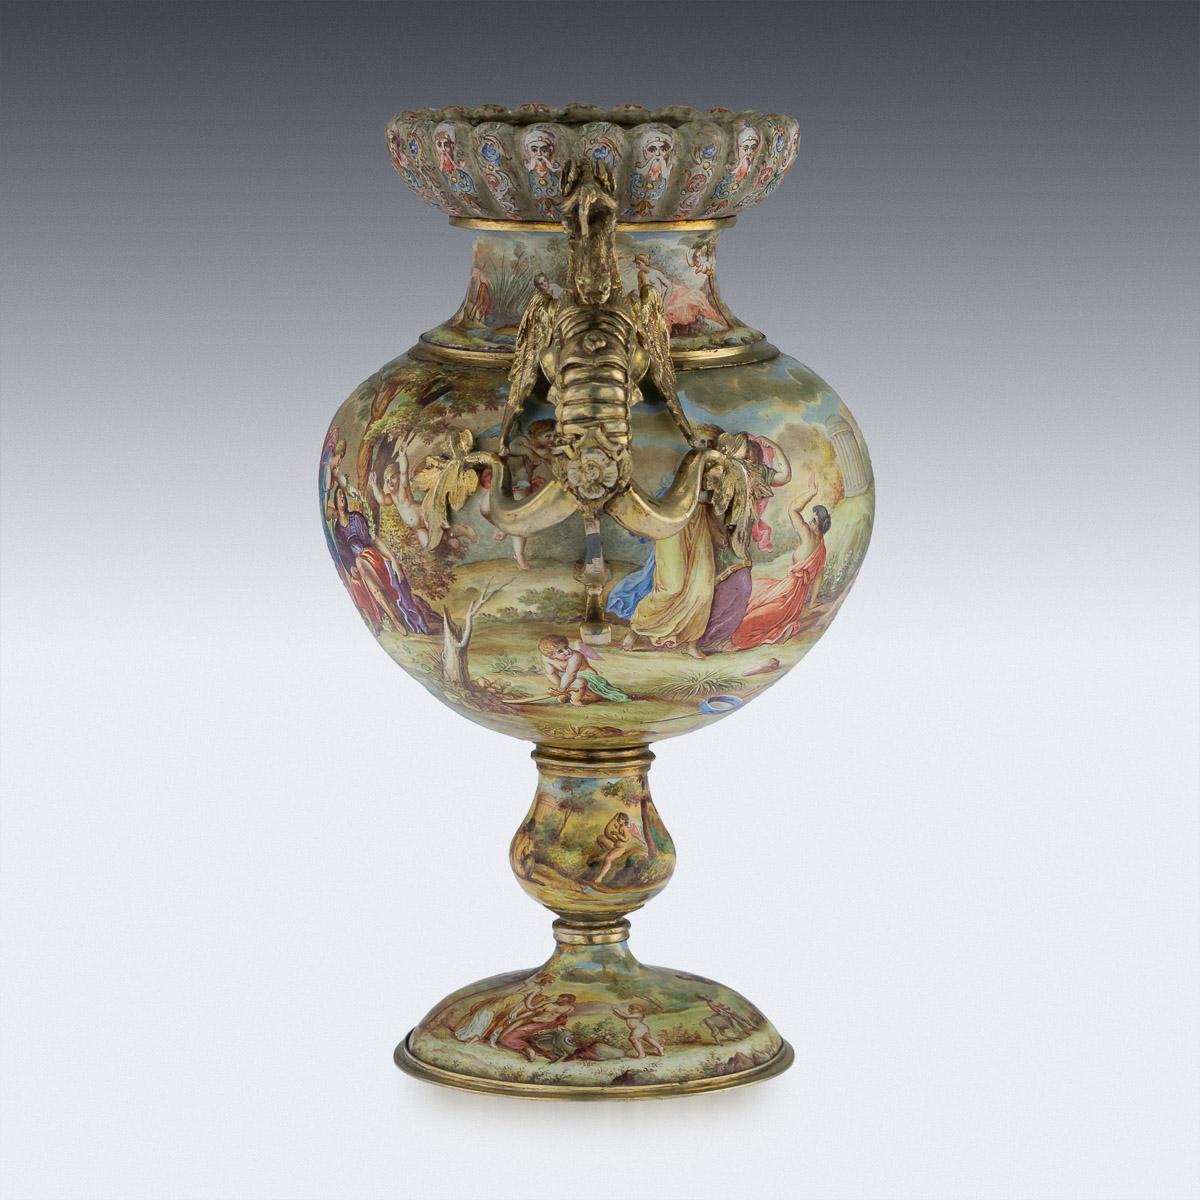 Antique late 19th century Austrian exceptional solid silver gilt and enamel twin handled vase, standing on an oval base, shaped bulbous stem and the body hand painted with classical allegorical scenes, sides applied with cast hippocampus handles.